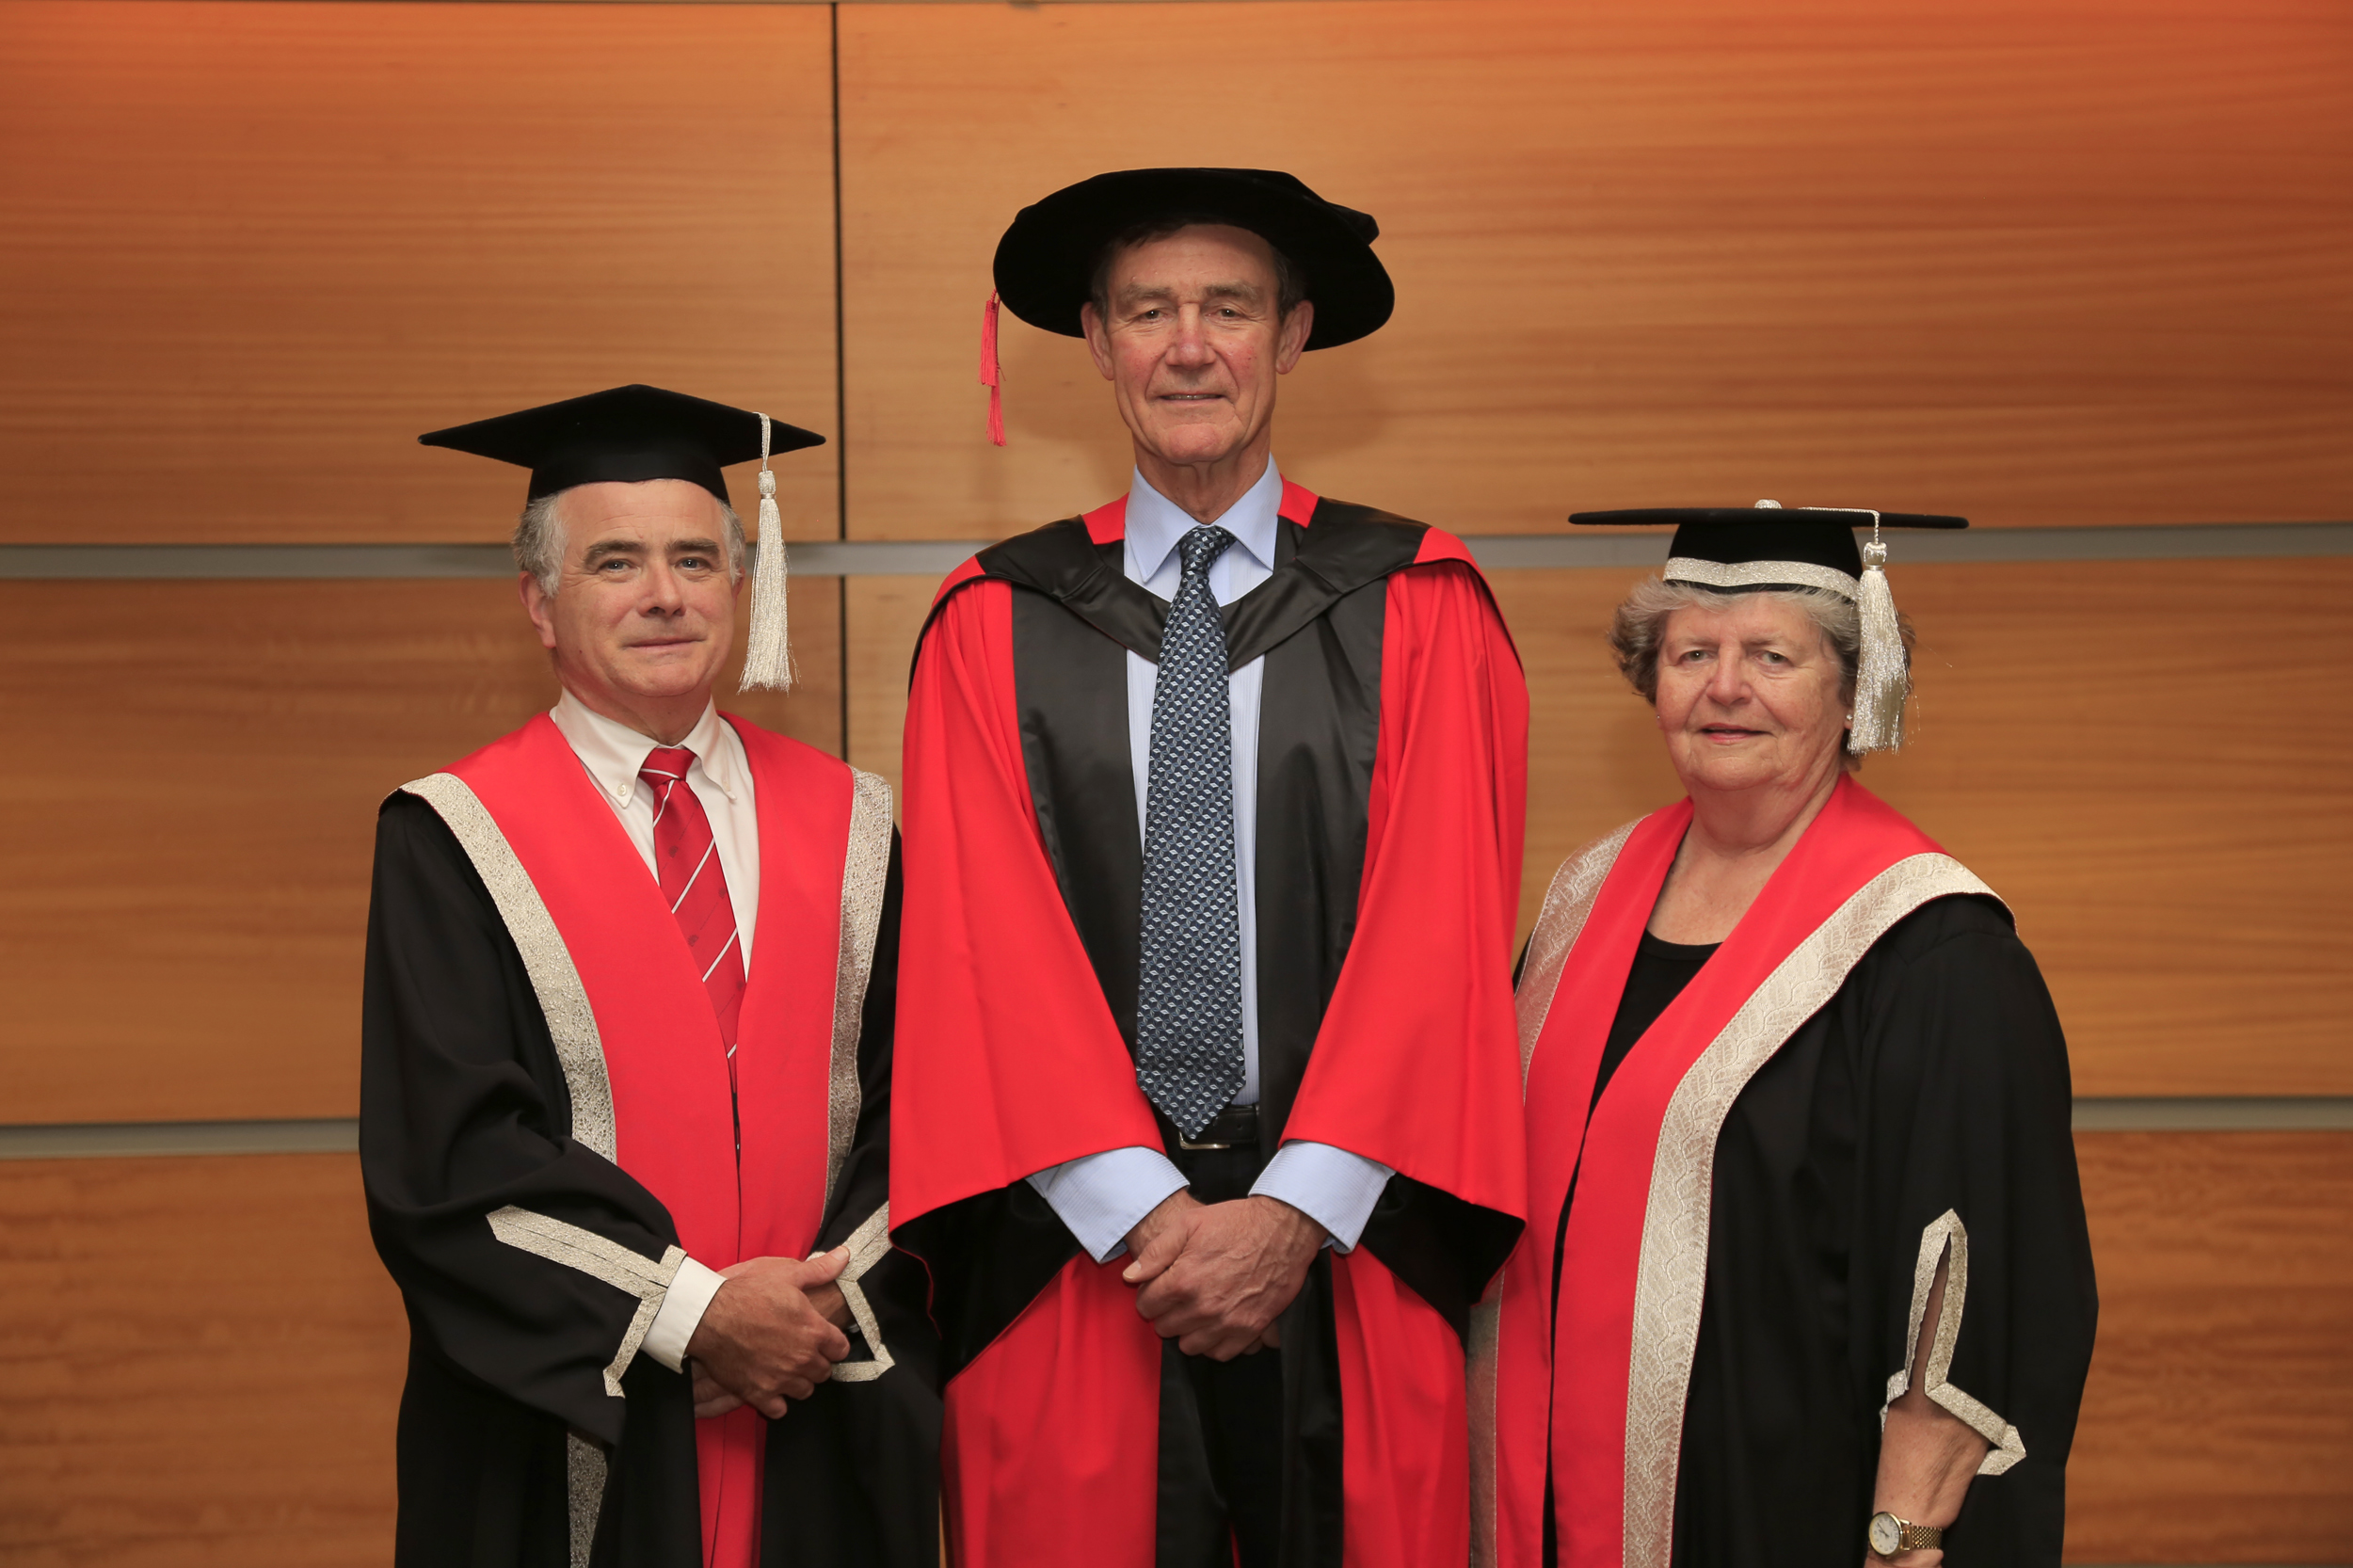 Air Chief Marshal Angus Houston AC, AFC (Retâ€™d), has been awarded the degree of Doctor of the University at a graduation ceremony